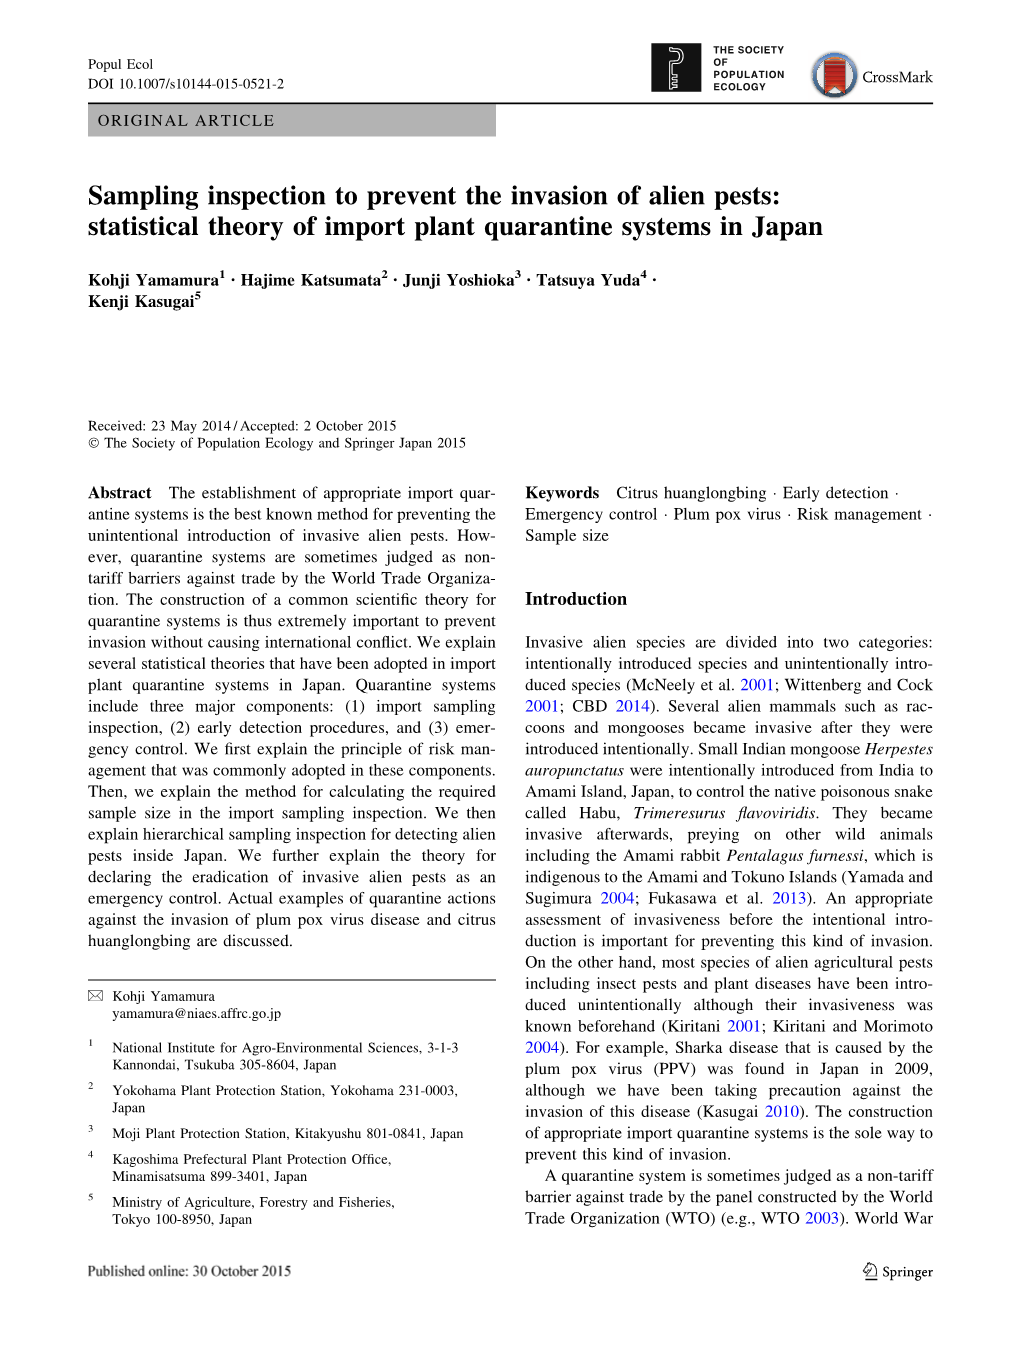 Sampling Inspection to Prevent the Invasion of Alien Pests: Statistical Theory of Import Plant Quarantine Systems in Japan